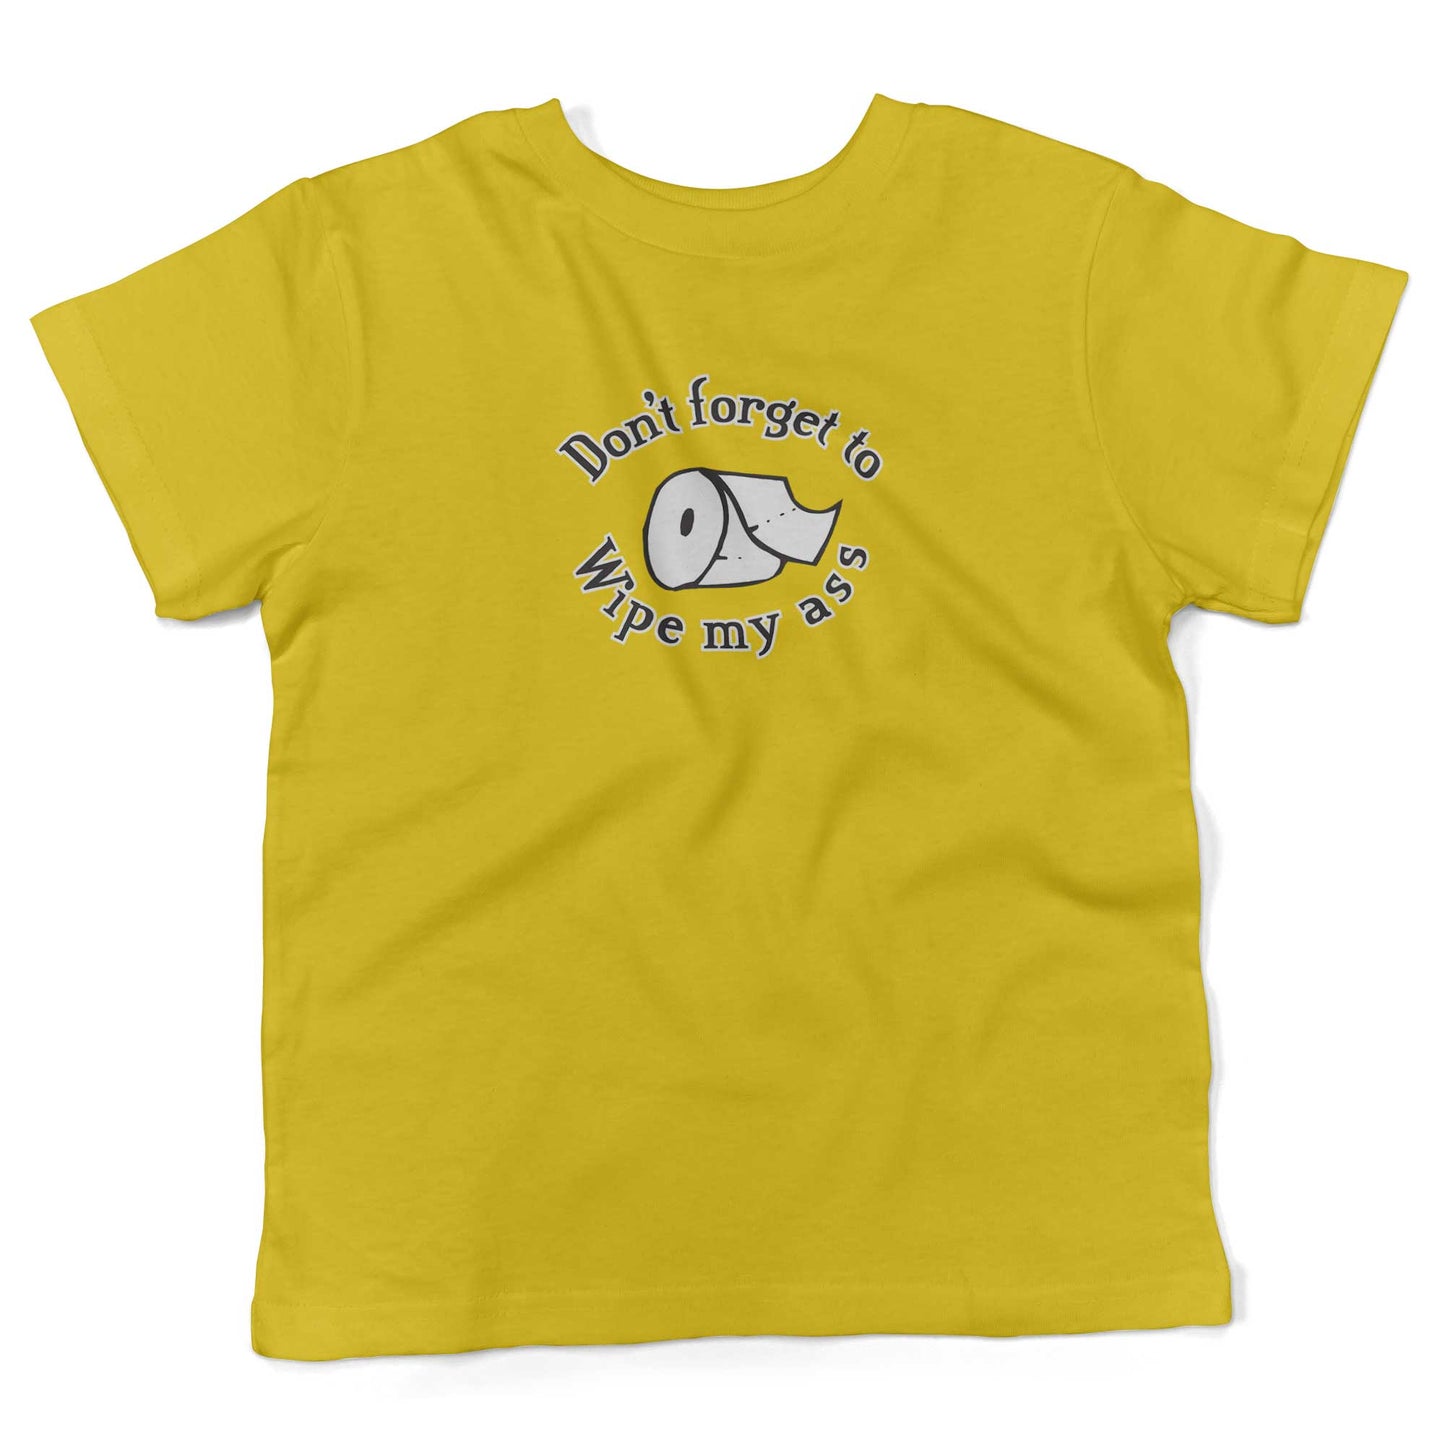 Don't Forget To Wipe My Ass Toddler Shirt-Sunshine Yellow-2T